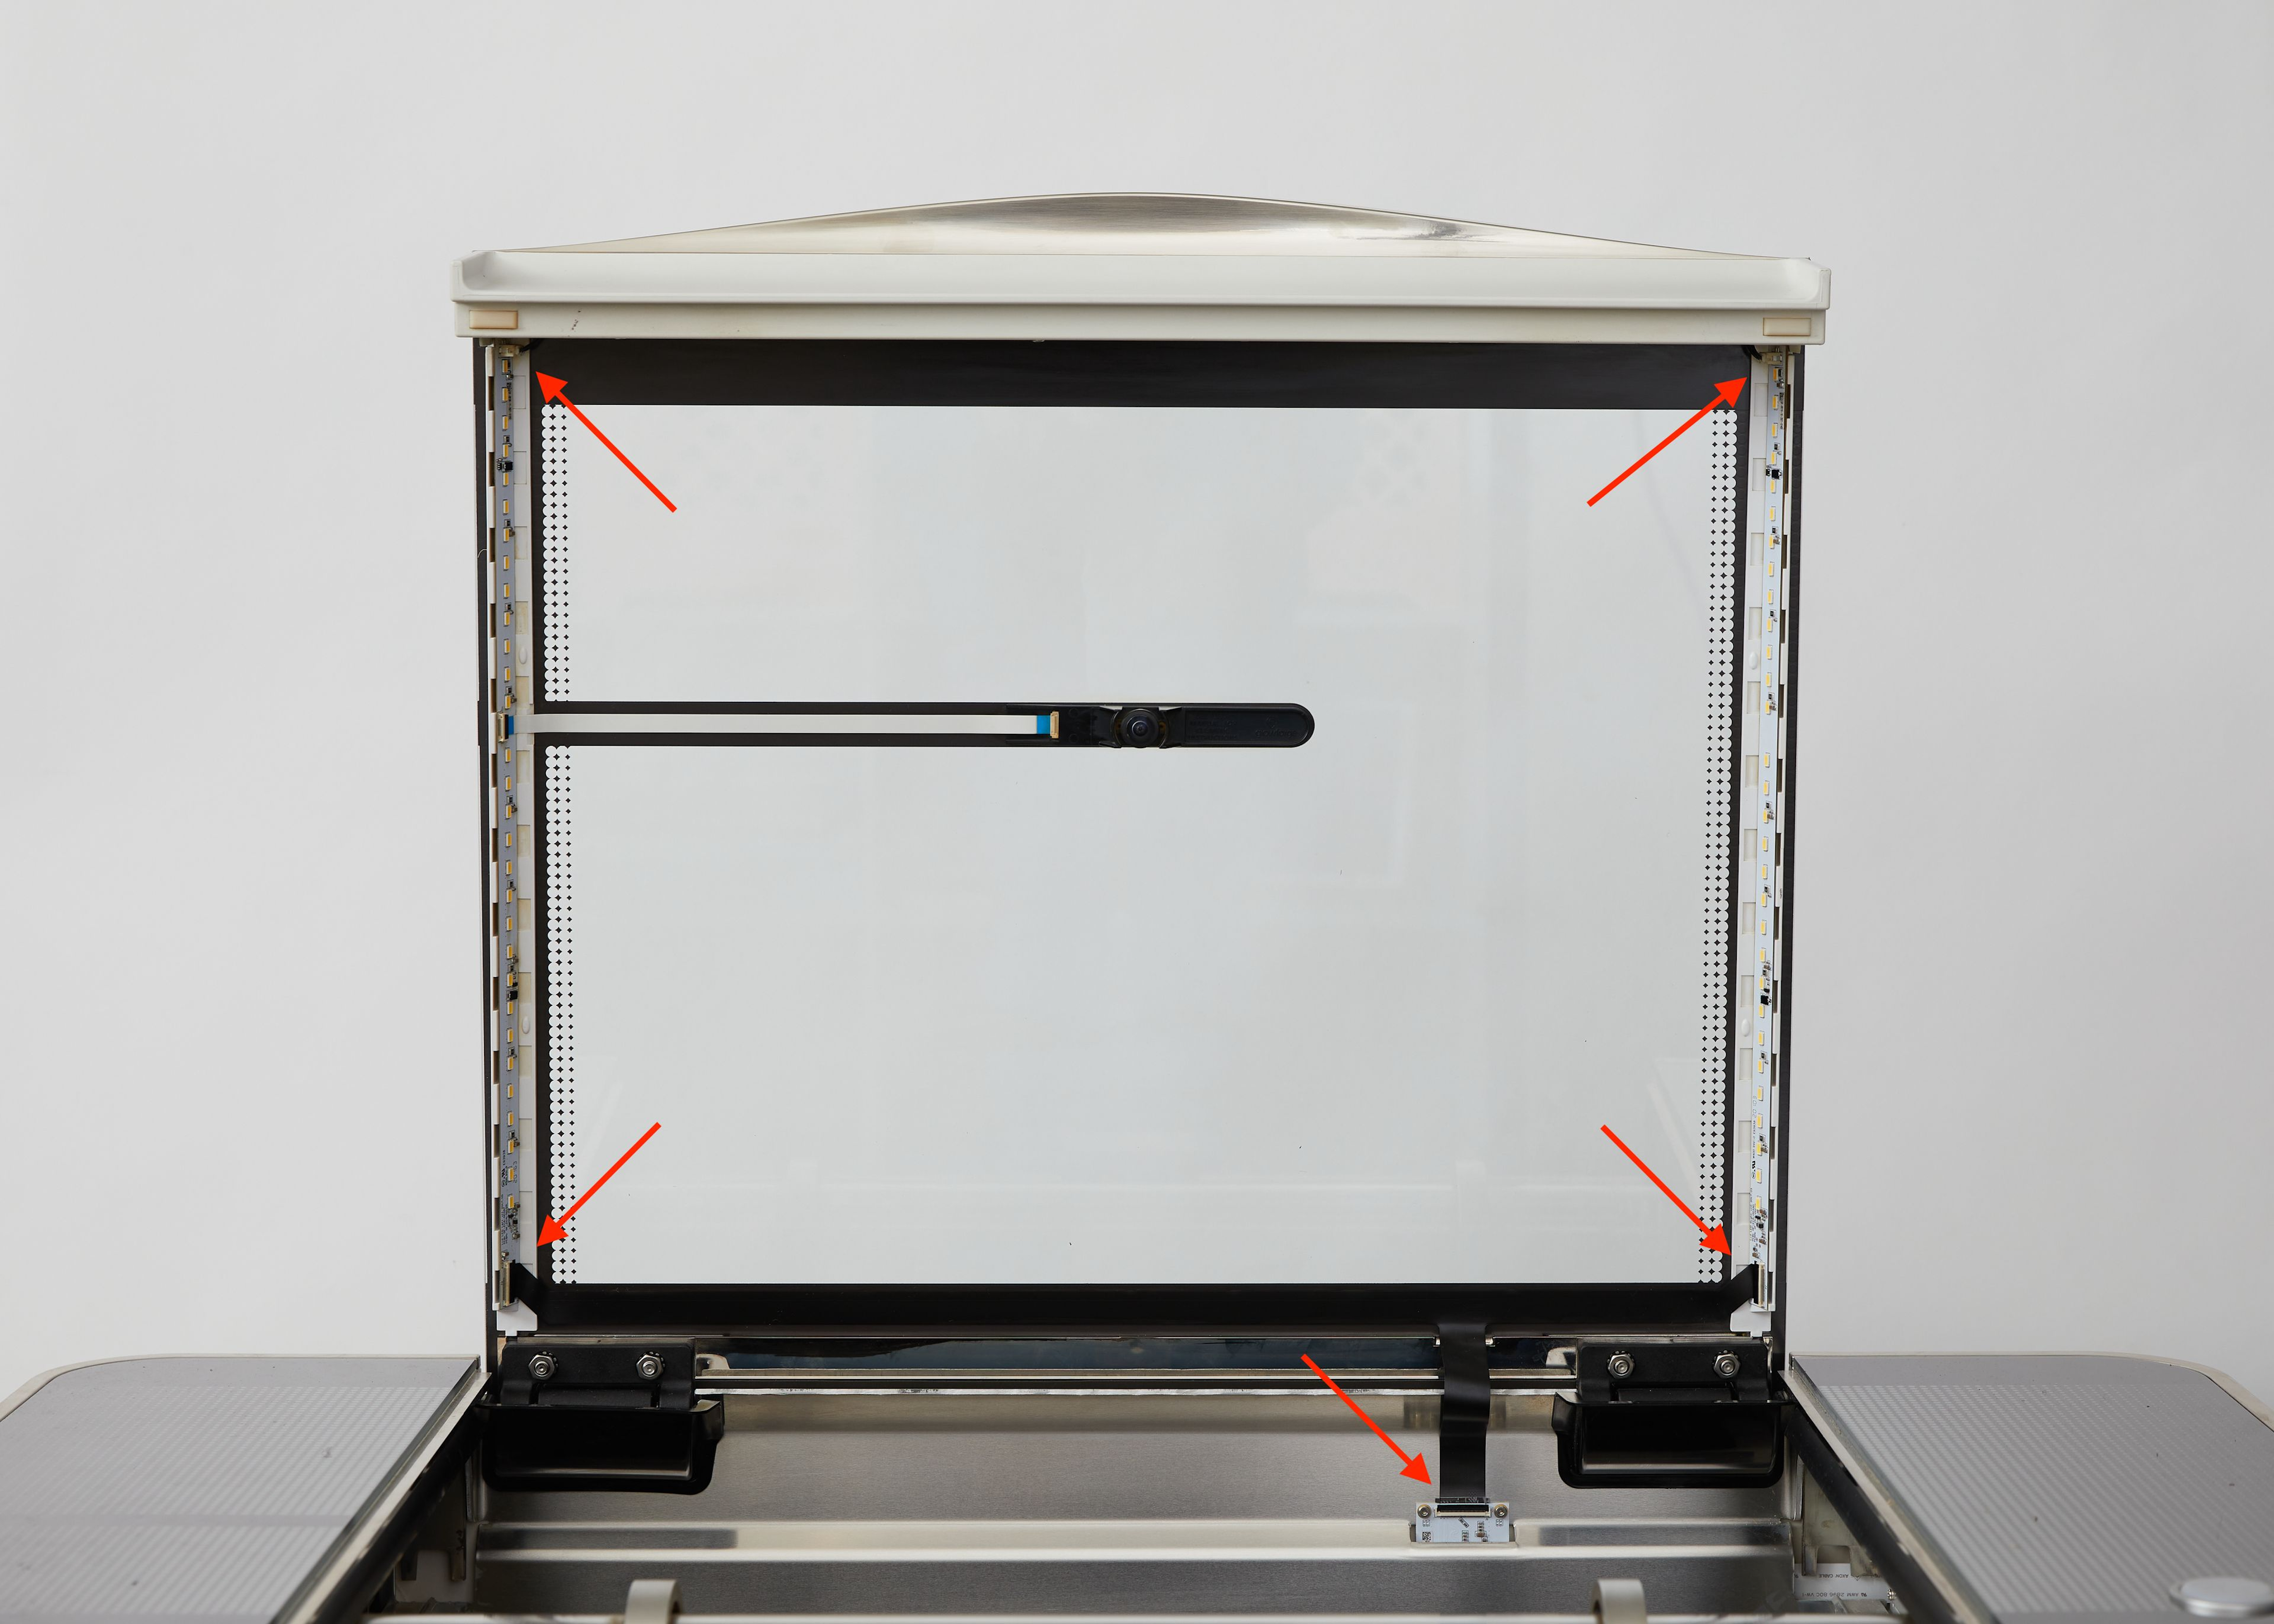 A Glowforge with its lid open. The 3 connections on the black lid cable near its hinge and the 2 connections on the white lid cable leading to the camera are circled.